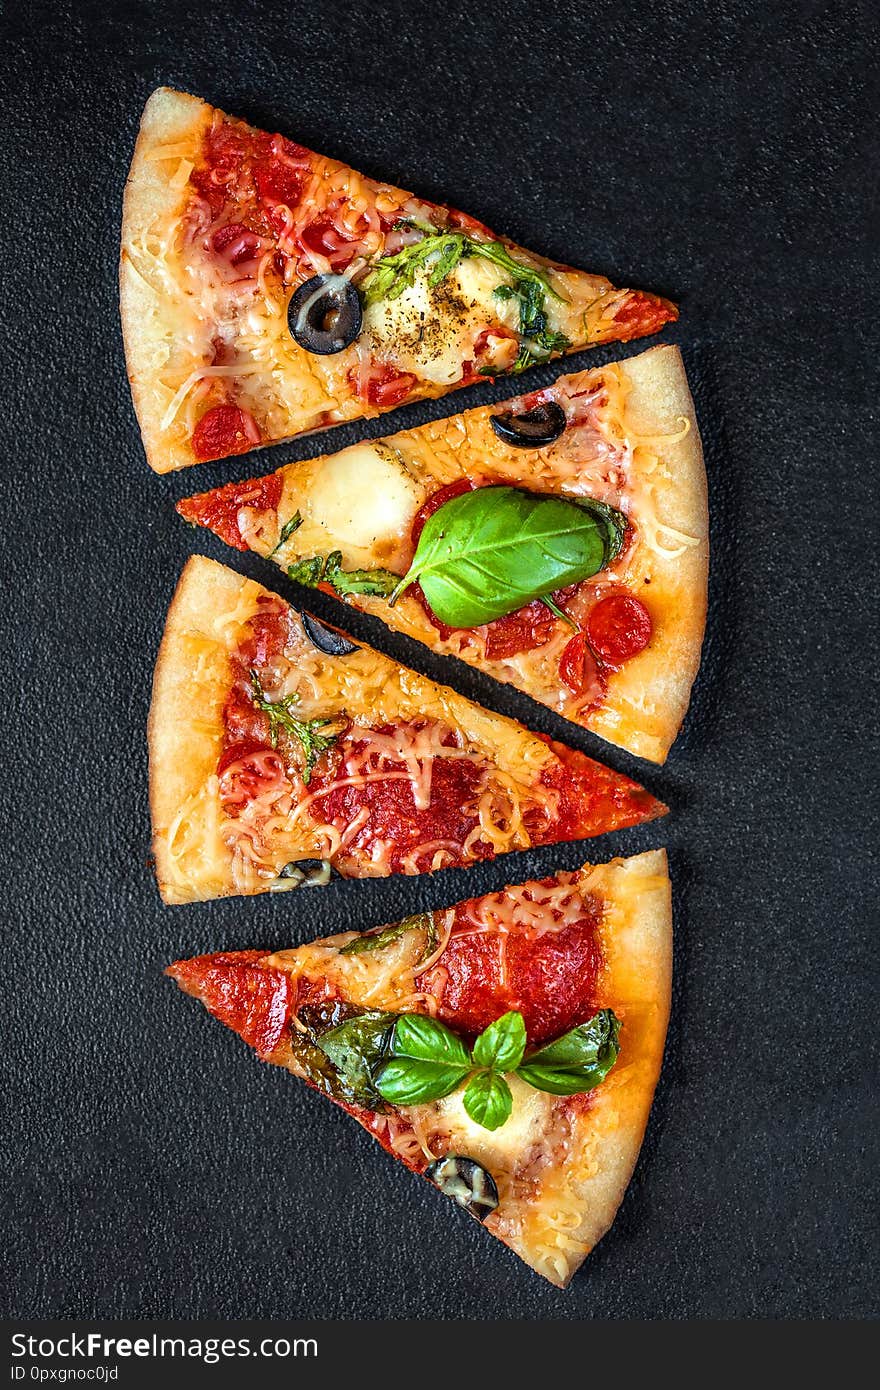 Slices of pizza with  pepperoni and basil leaf  with spices on black background, copy space. Flatbread pizza. Top view..